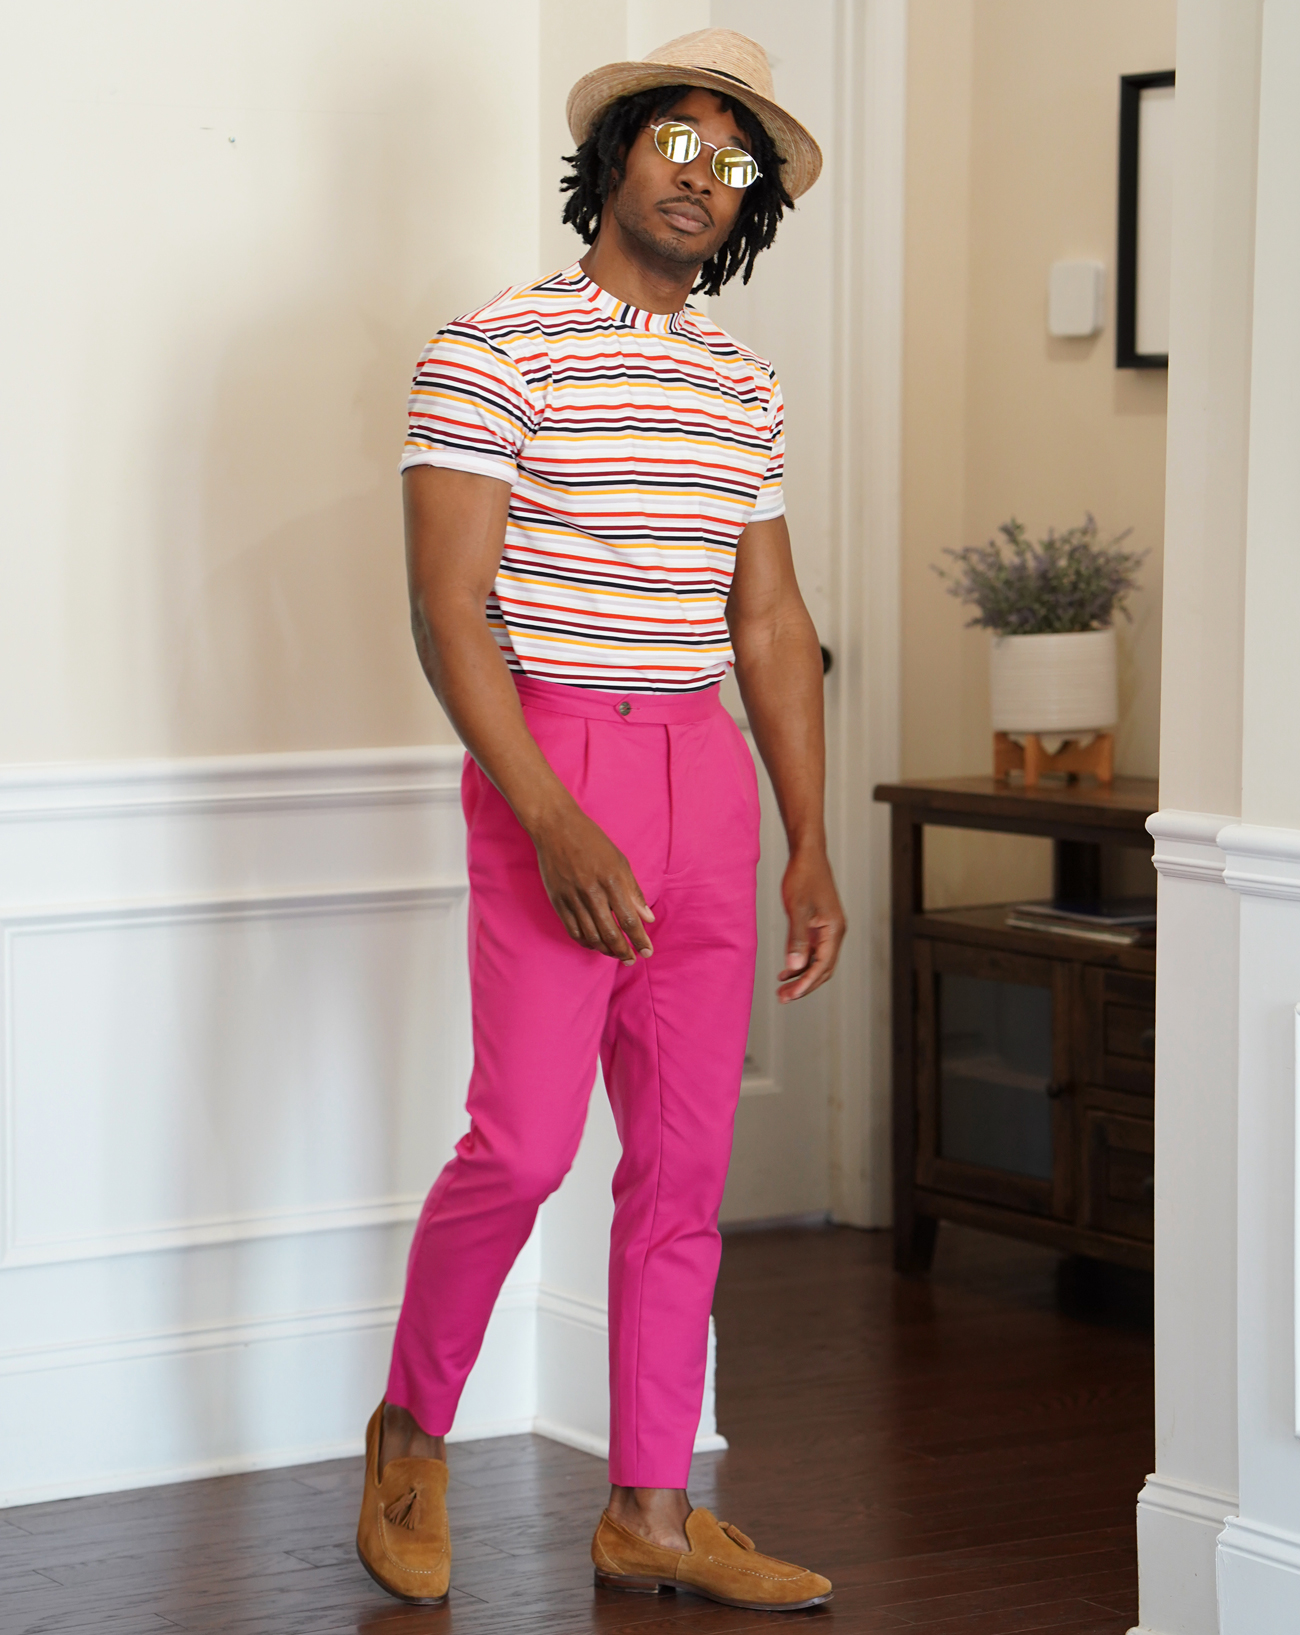 DIY T-SHIRT w/ STRIPED KNIT FROM MELANATED FABRIC – Norris Danta Ford